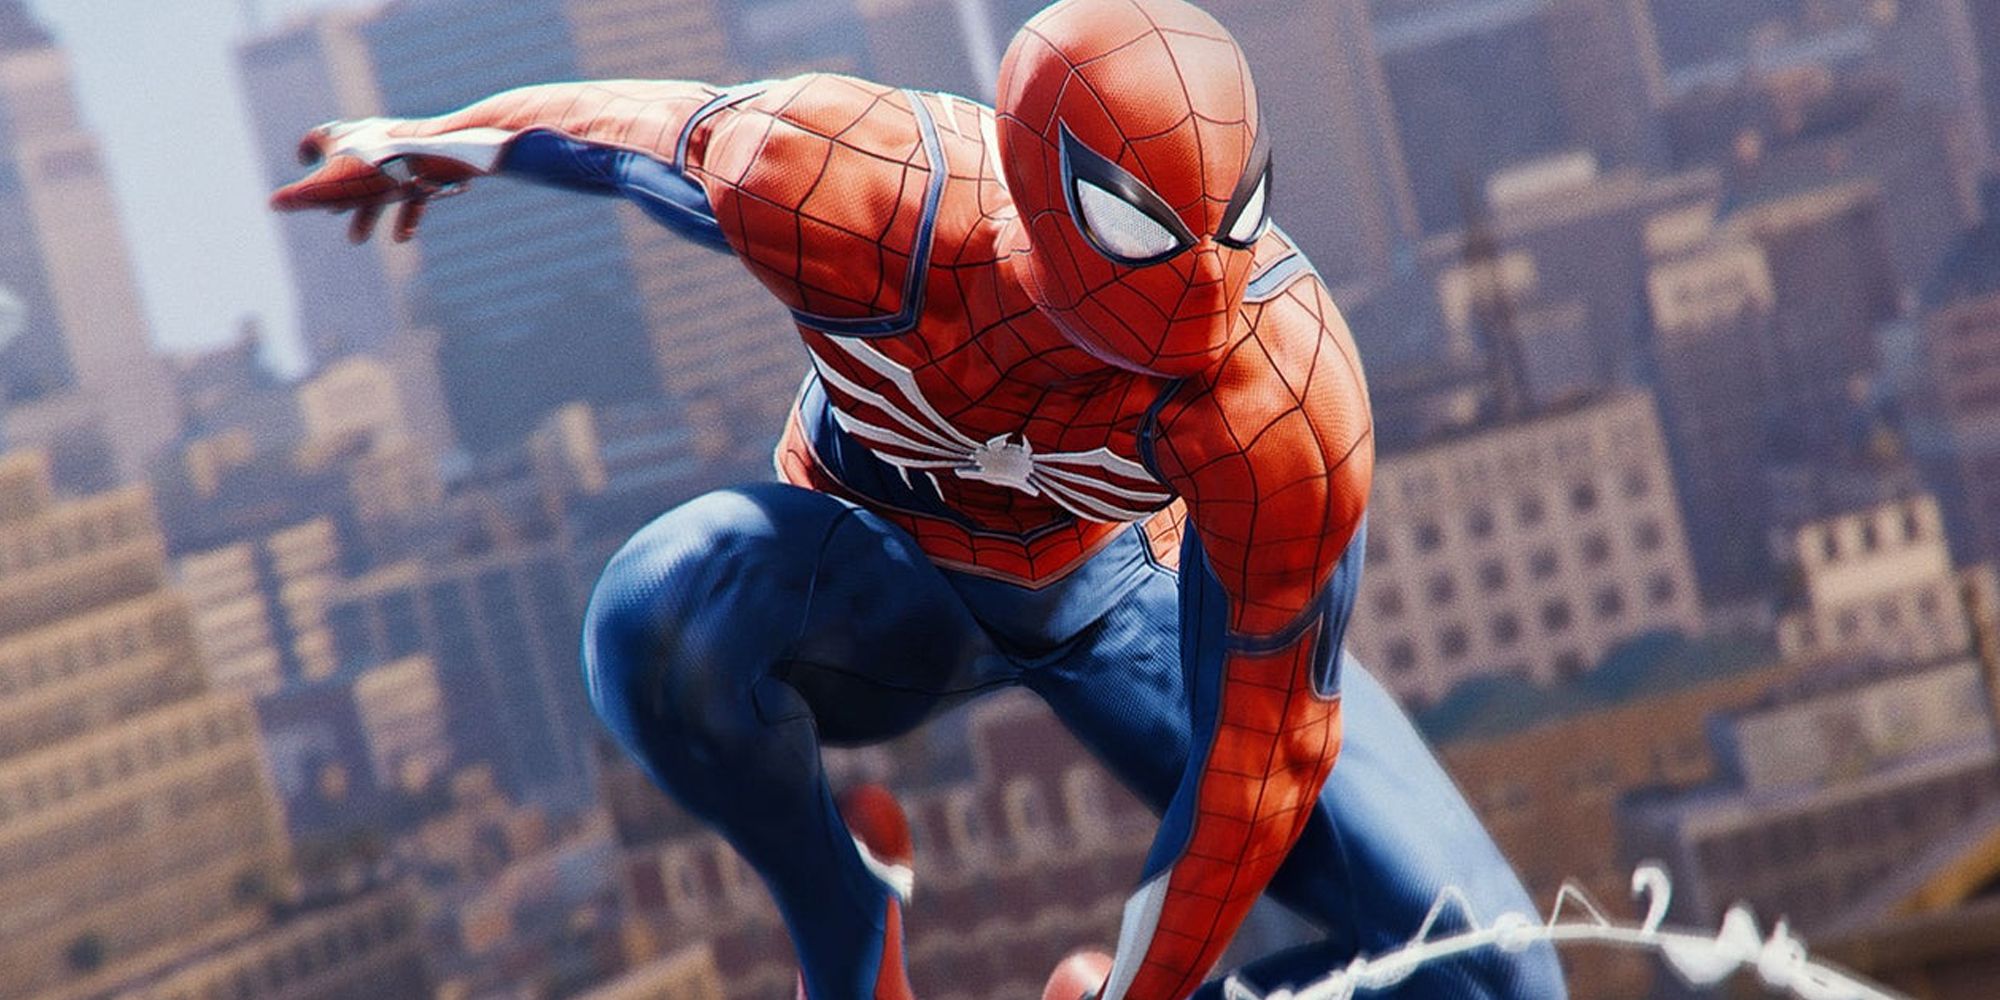 Spider-Man Remastered Is Launching Standalone For PS5 Later This Month